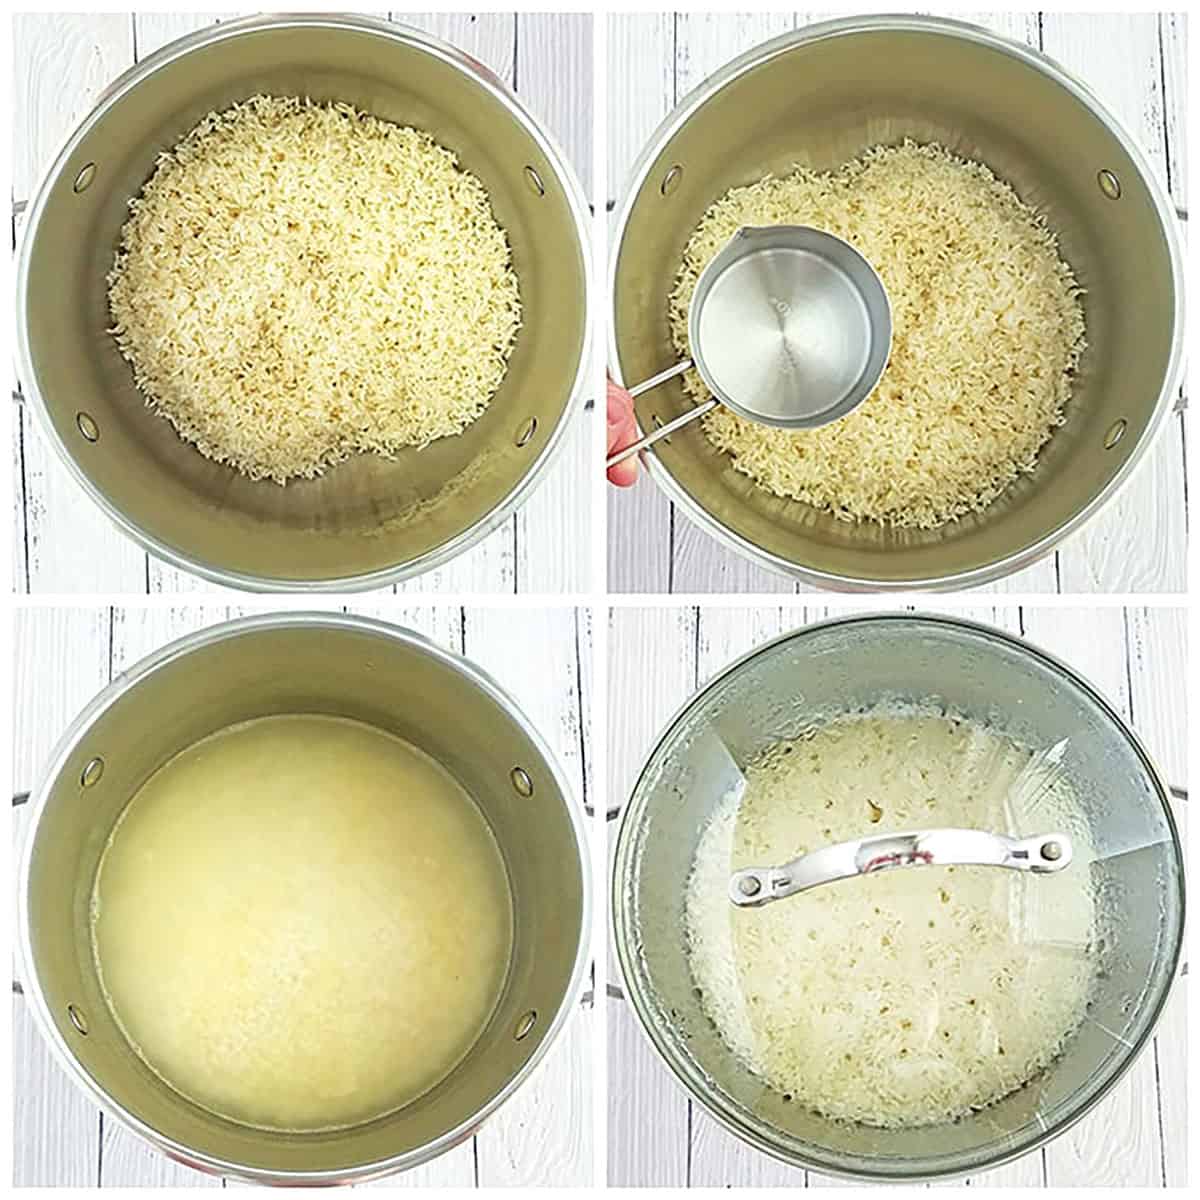 As soon as the rice starts boiling (in about 30 seconds) reduce the heat to low and set the timer for 15 minutes to simmer.